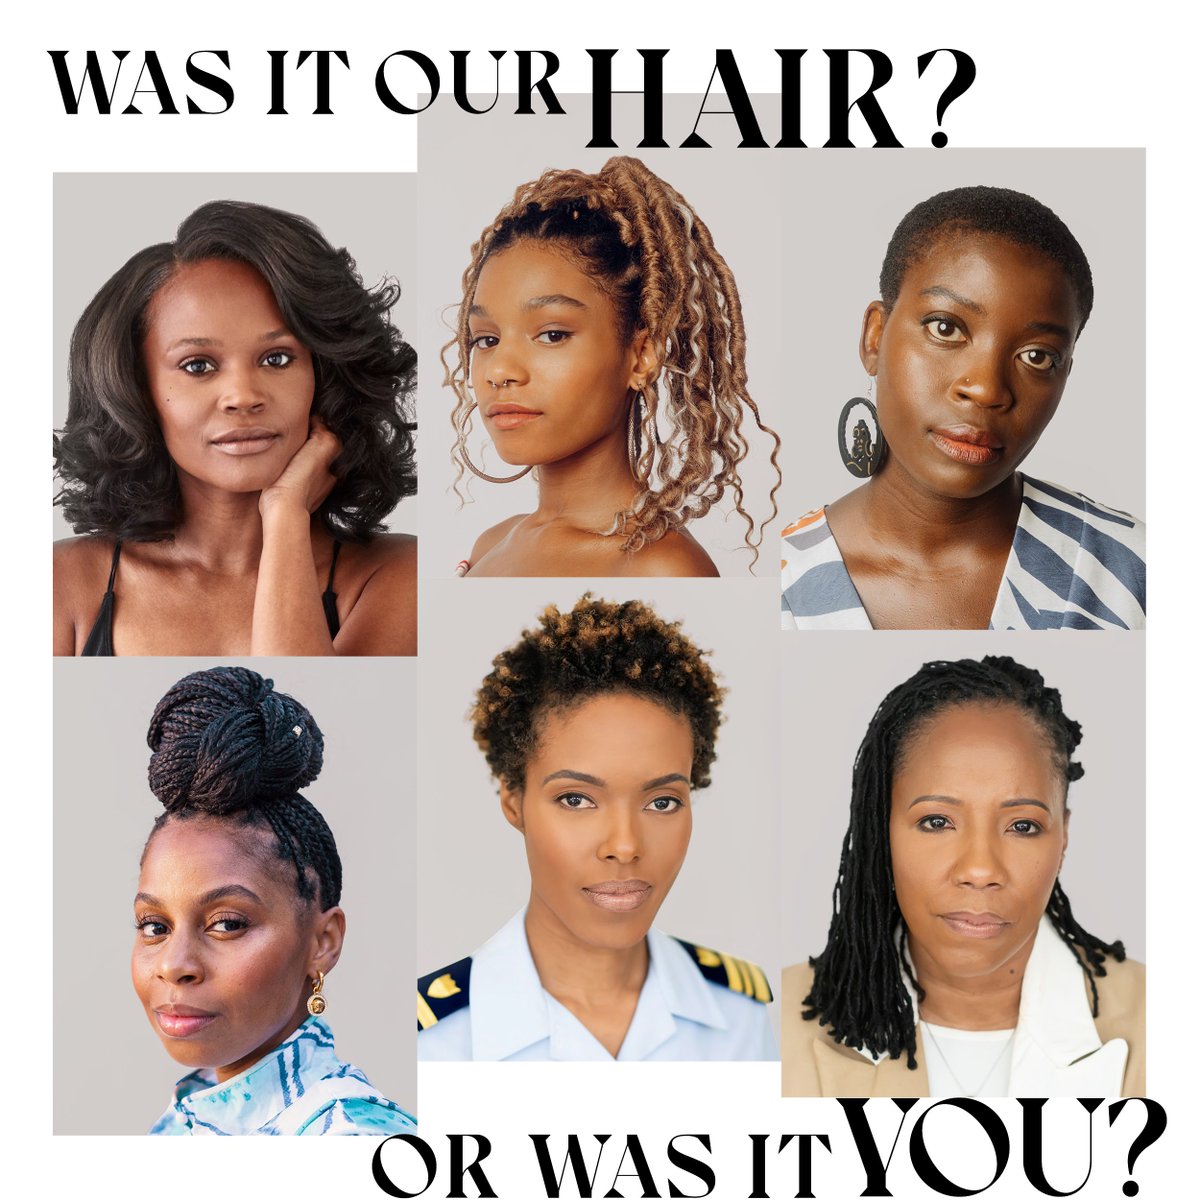 Women have always had to deal with societal pressures to look a certain way. But if you’re Black in America, the stakes of that pressure are higher: Conformity is, often, a means of survival.  #OurHairIssue, written by  @AshleyAlese.  http://glmr.co/C32QPI9  (A THREAD)